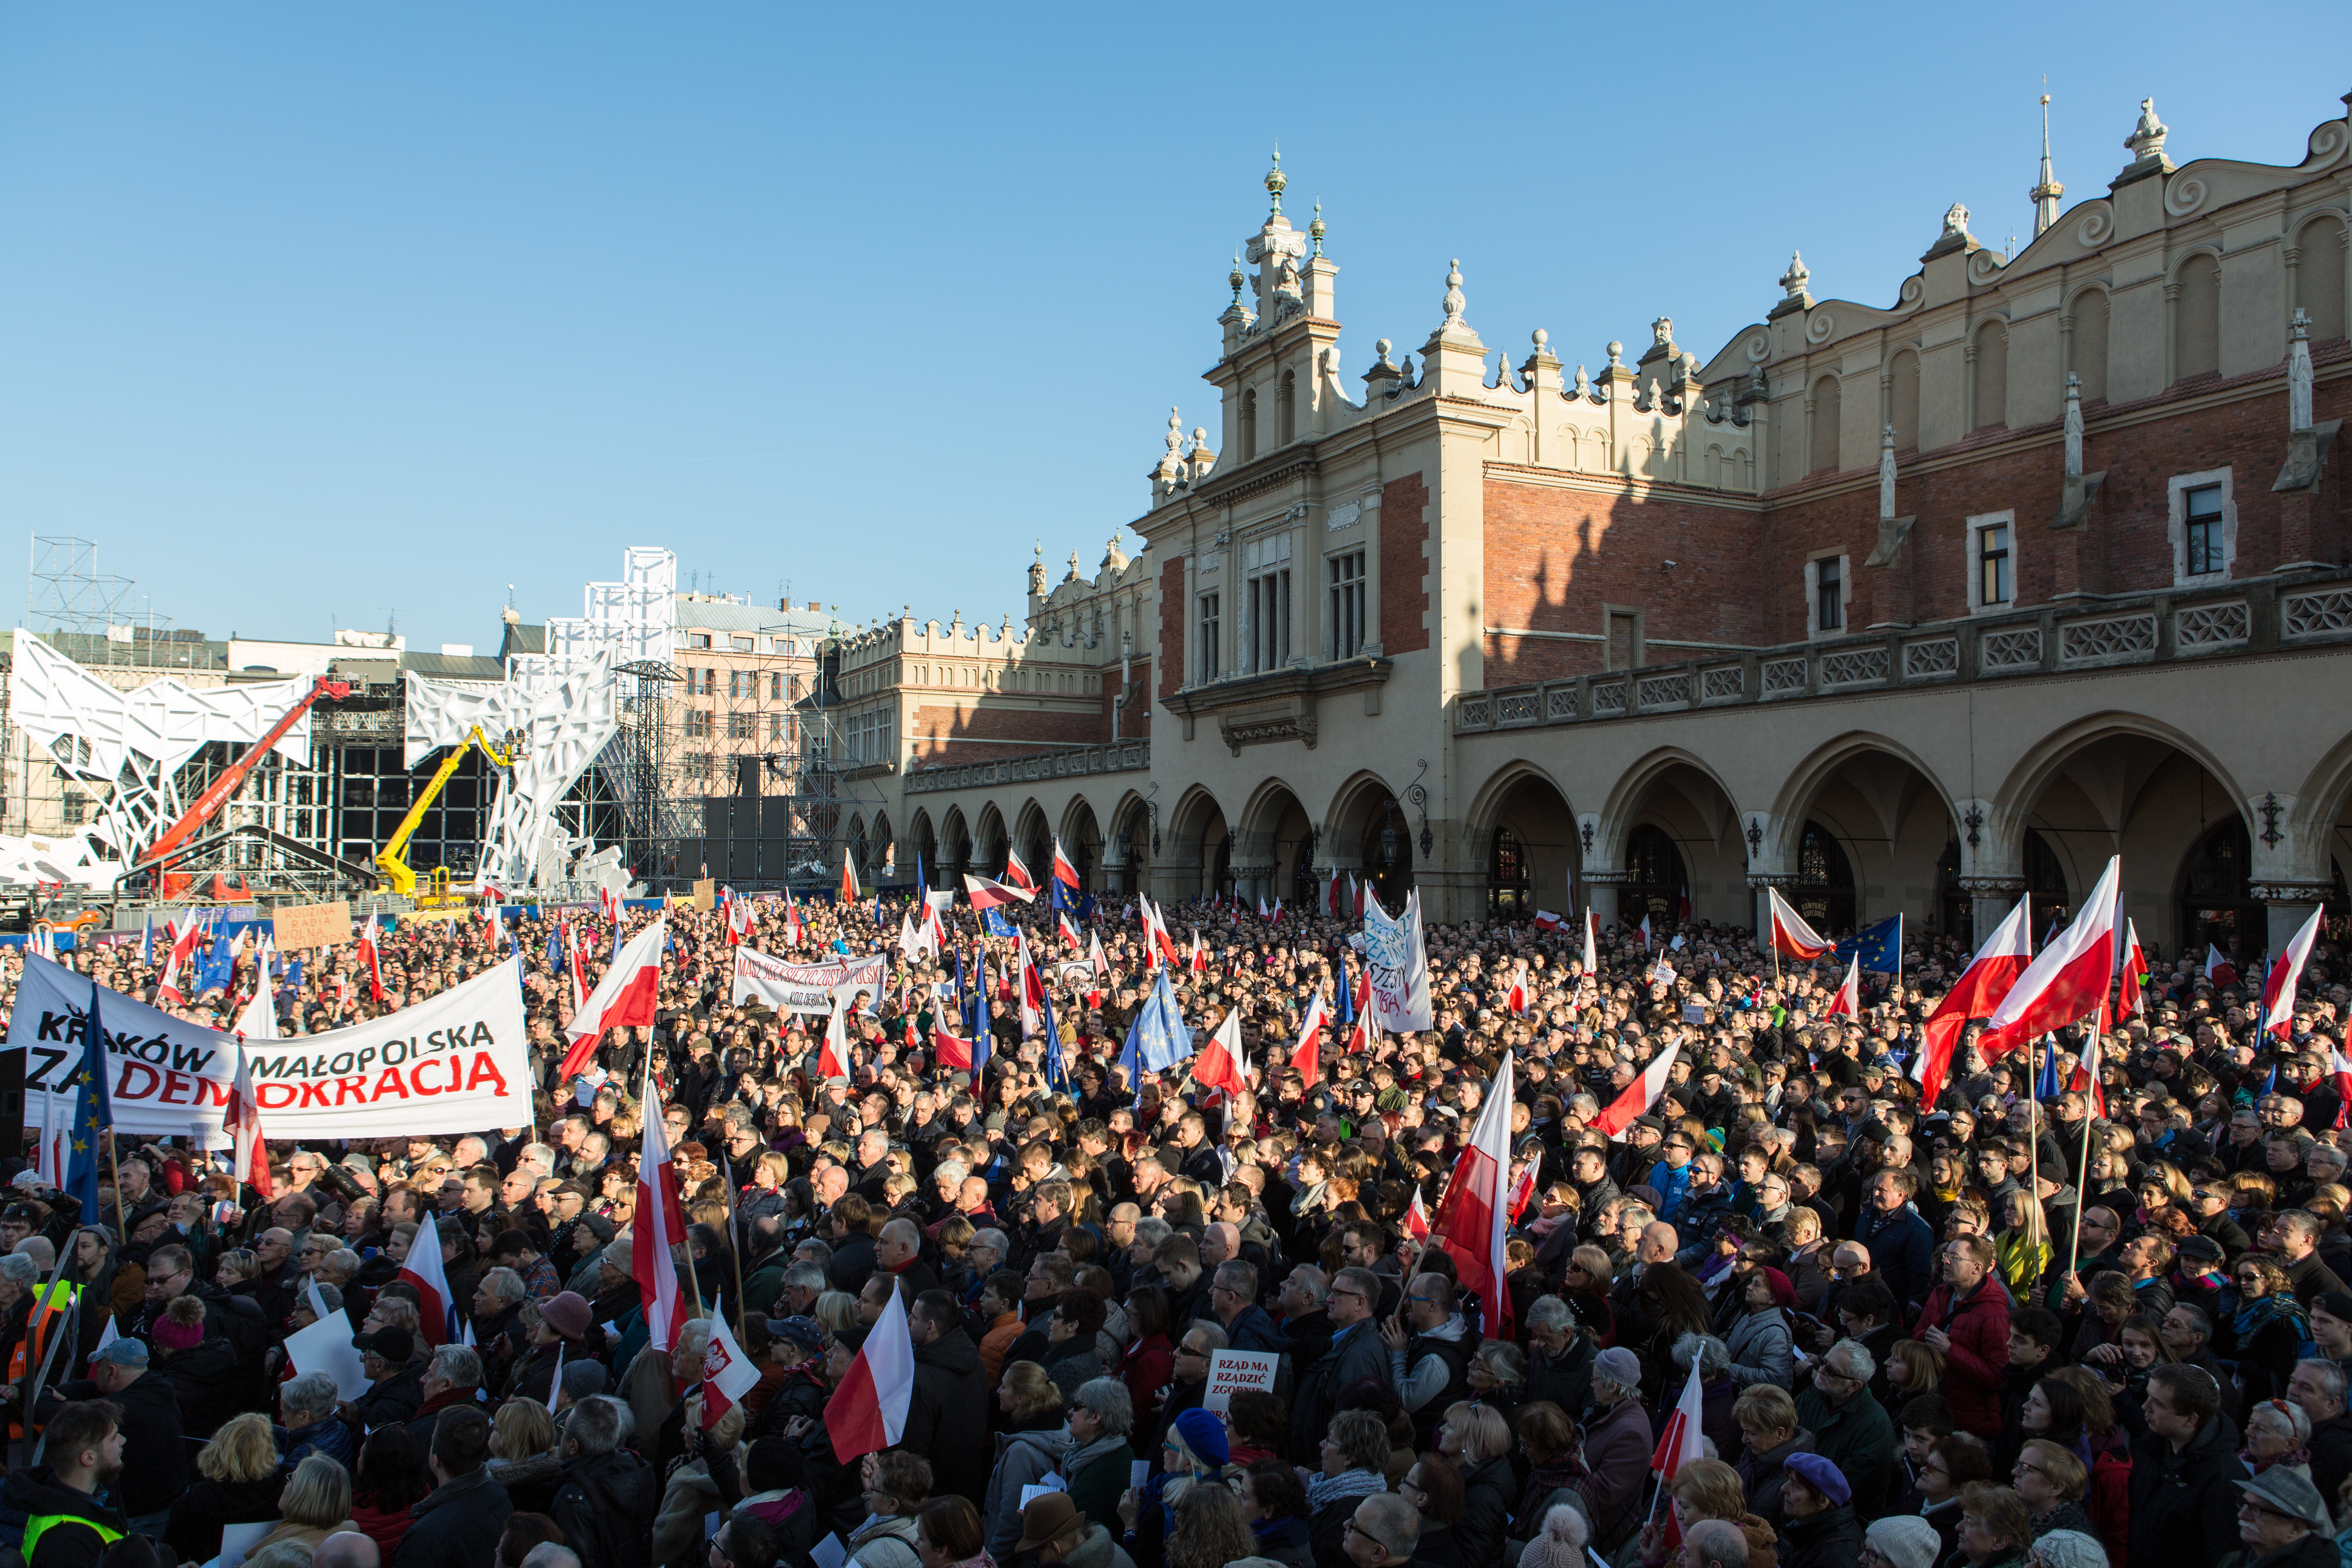 Thousands march in Poland in 2015 against the conservative government (Shutterstock).